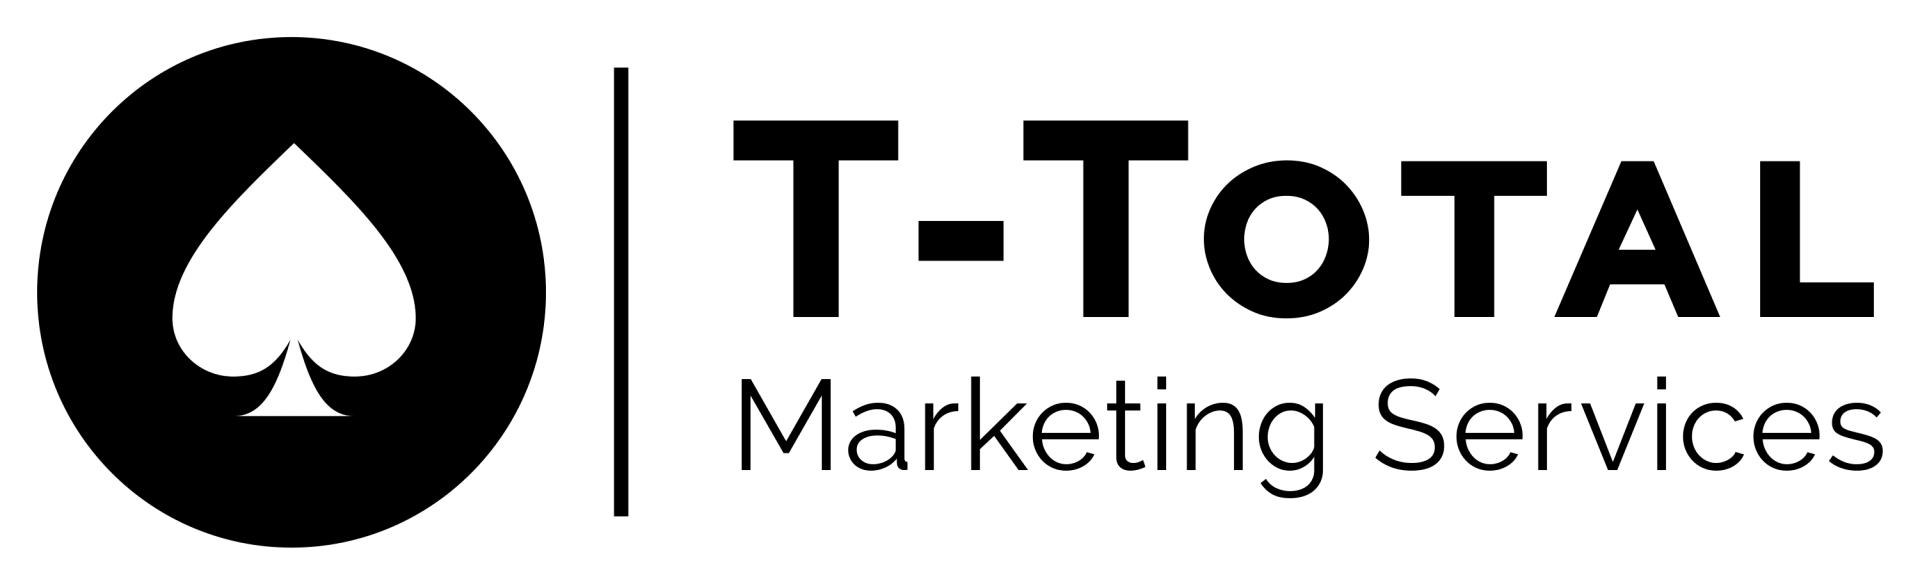 Marketing Service Logo - Home Total Marketing Services